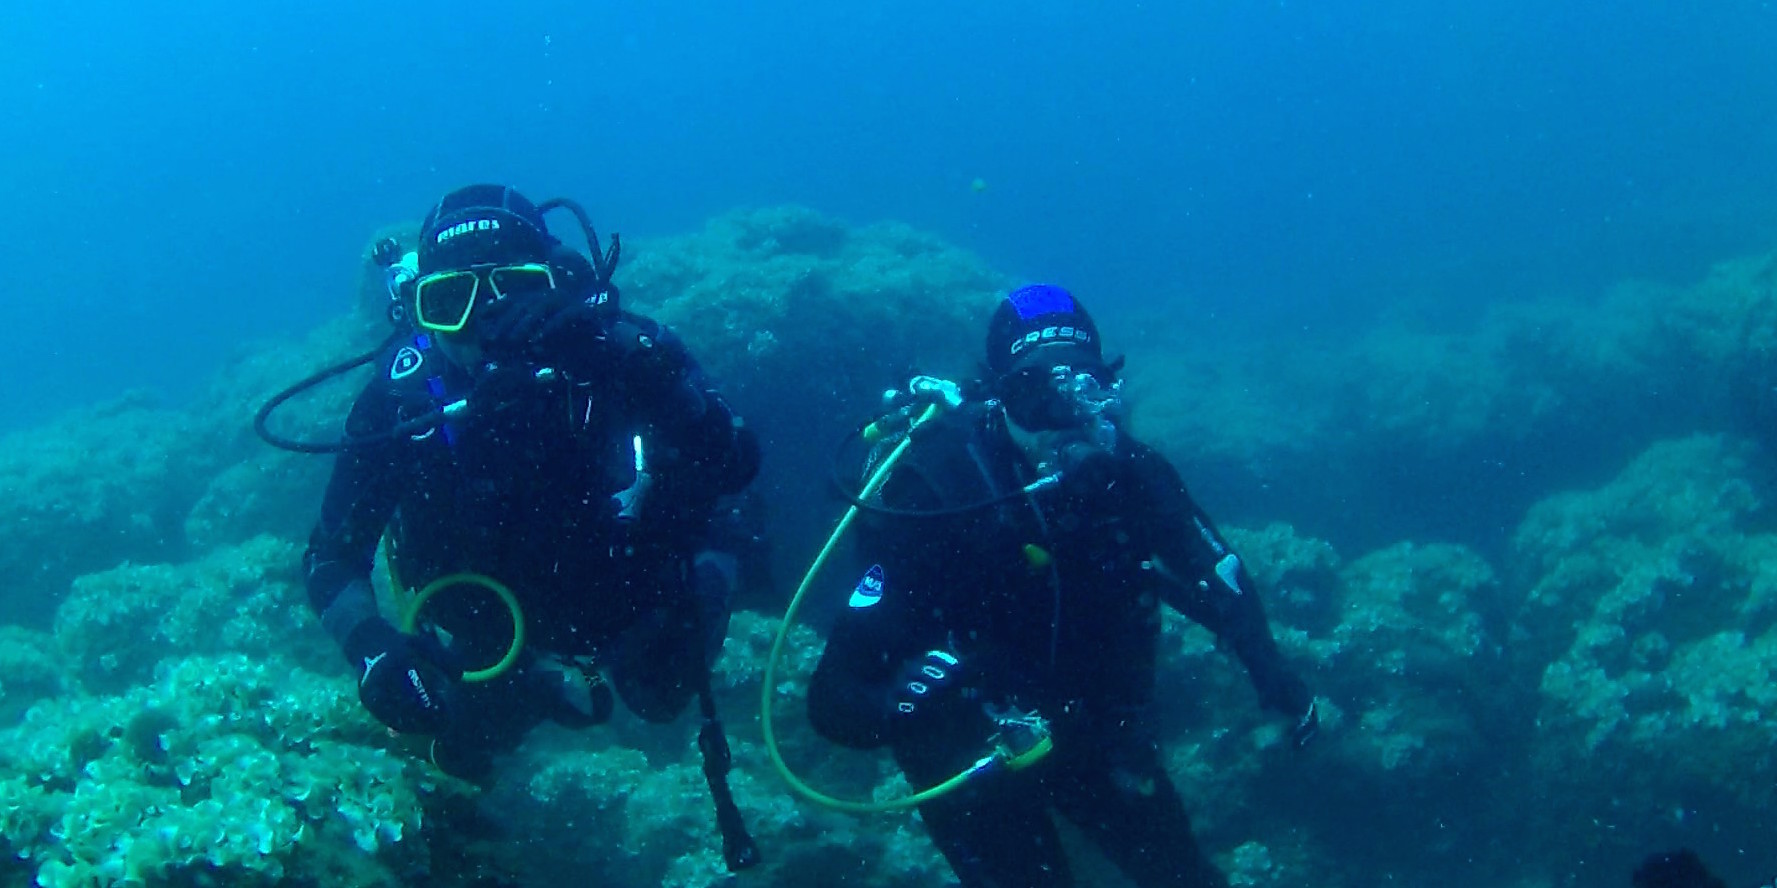 Join us for this fun scuba diving tour